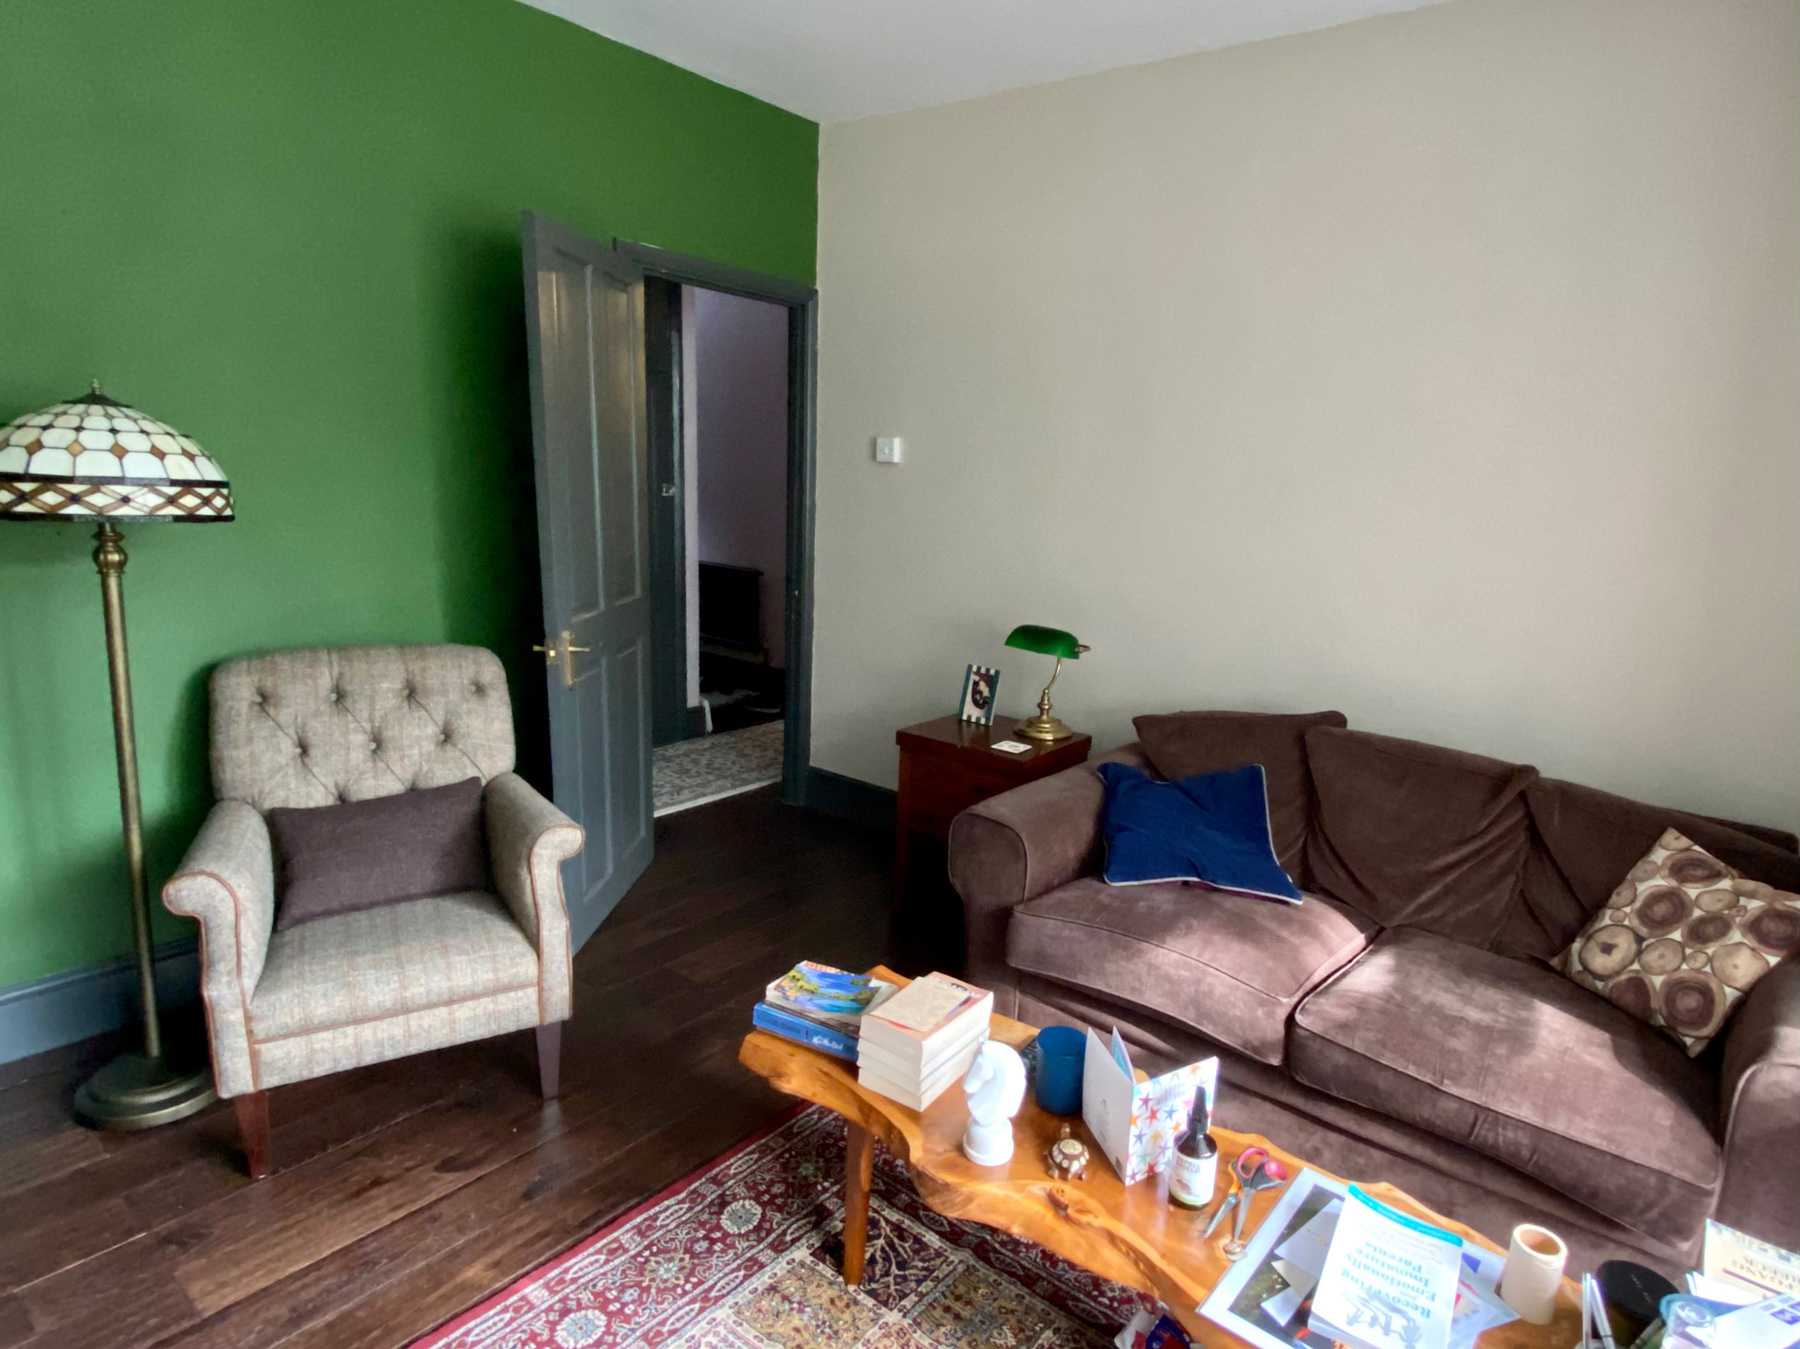 The corner of a living room with green on one wall and beige cream on the other